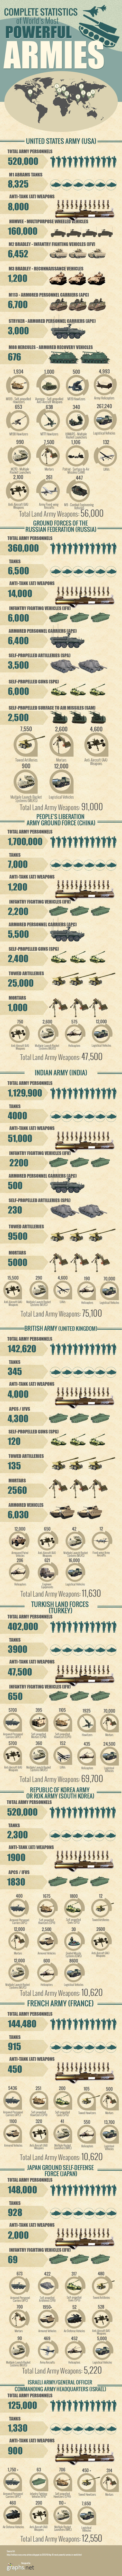 Statistics of World’s Most Powerful Armies